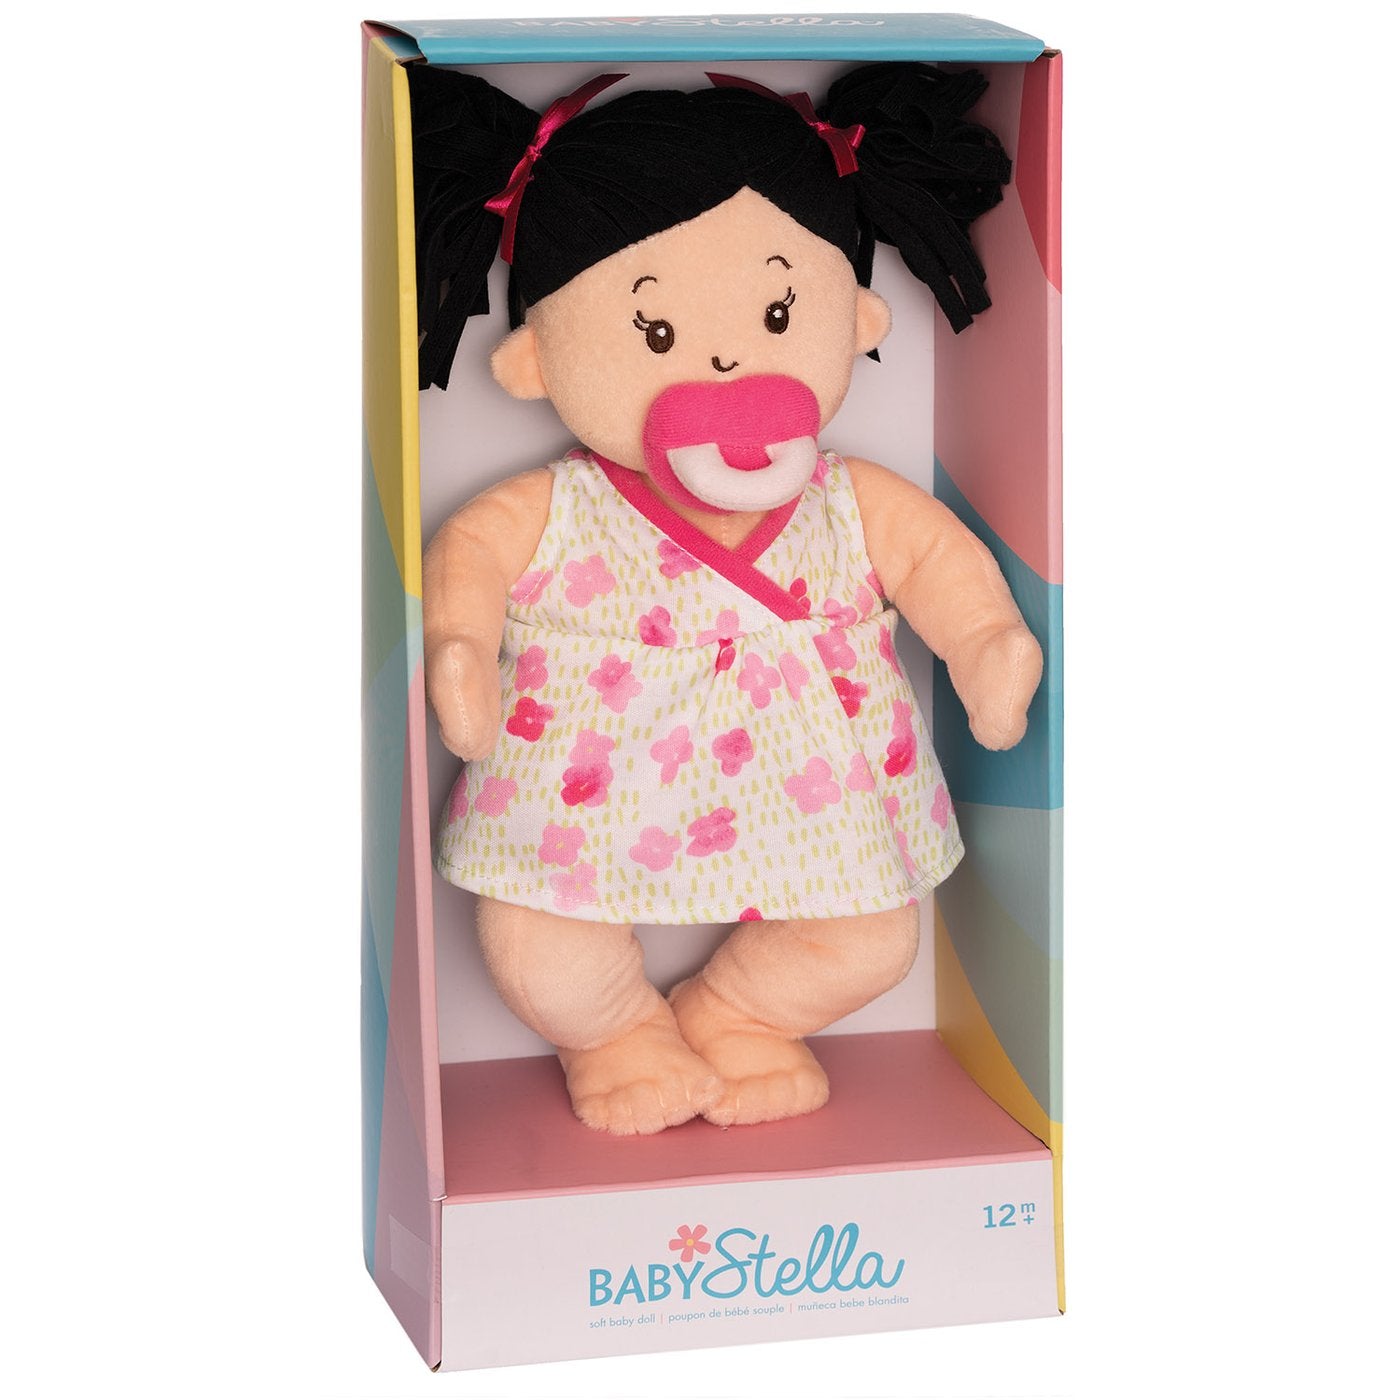 In Box Manhattan Toy Baby Stella Peach Doll with Black Pigtails Toy - ANB Baby 